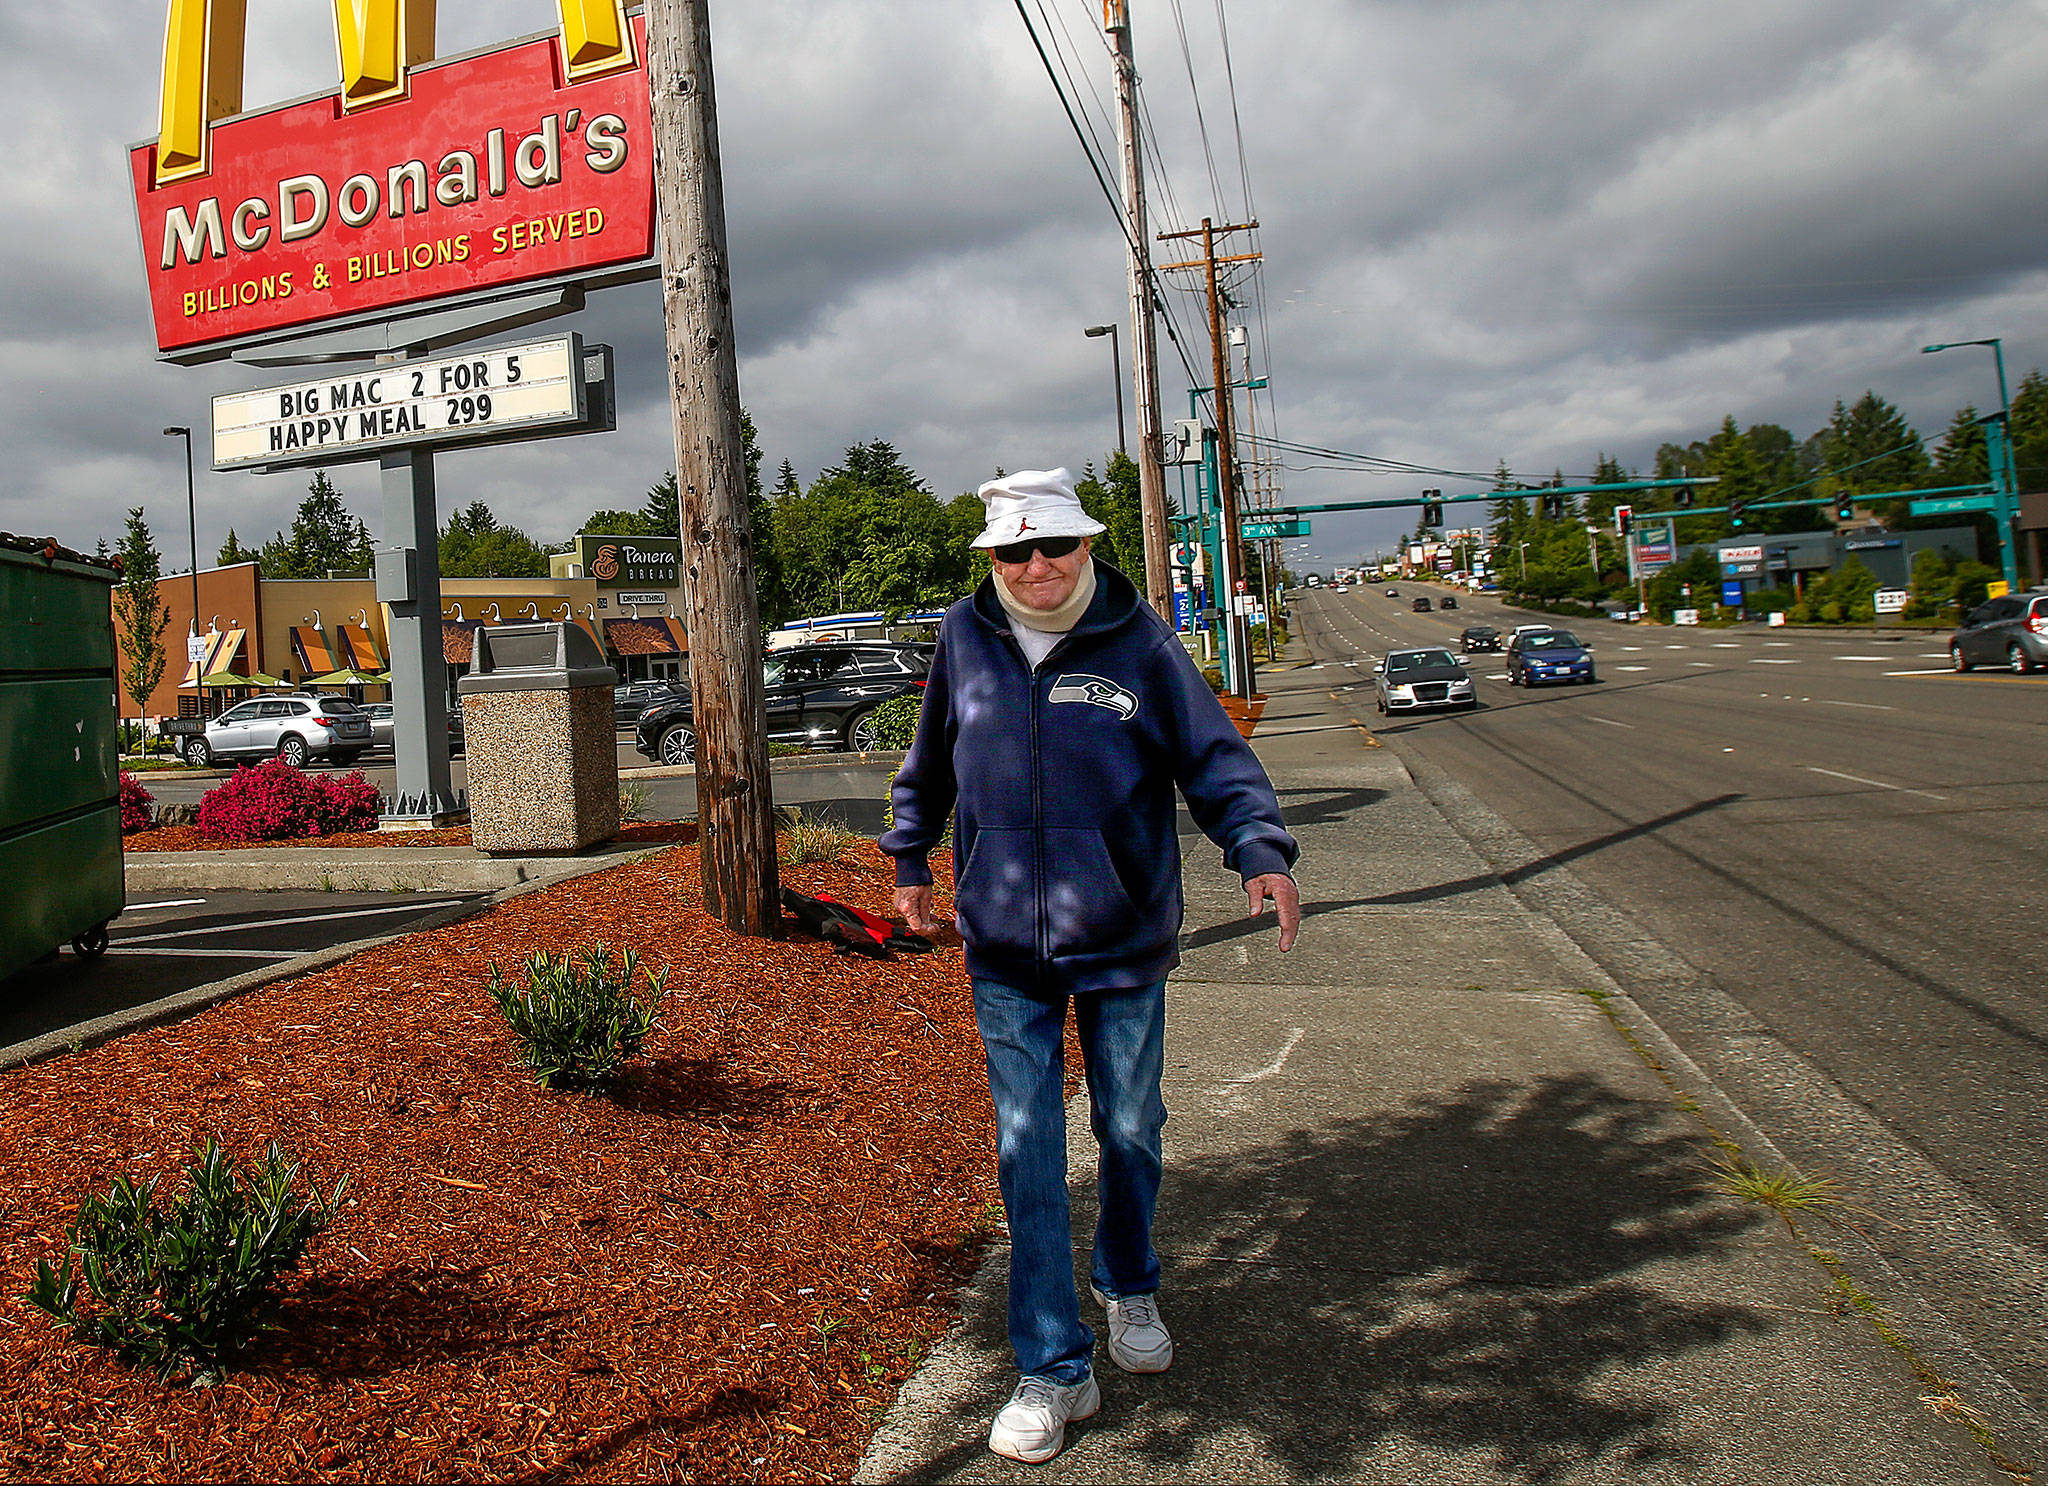 Step by step, Ron Williams, 84, makes his way along Everett Mall Way. He walks six miles each day, sometimes stopping at McDonald’s between his morning and afternoon three-mile walks. (Dan Bates / The Herald)